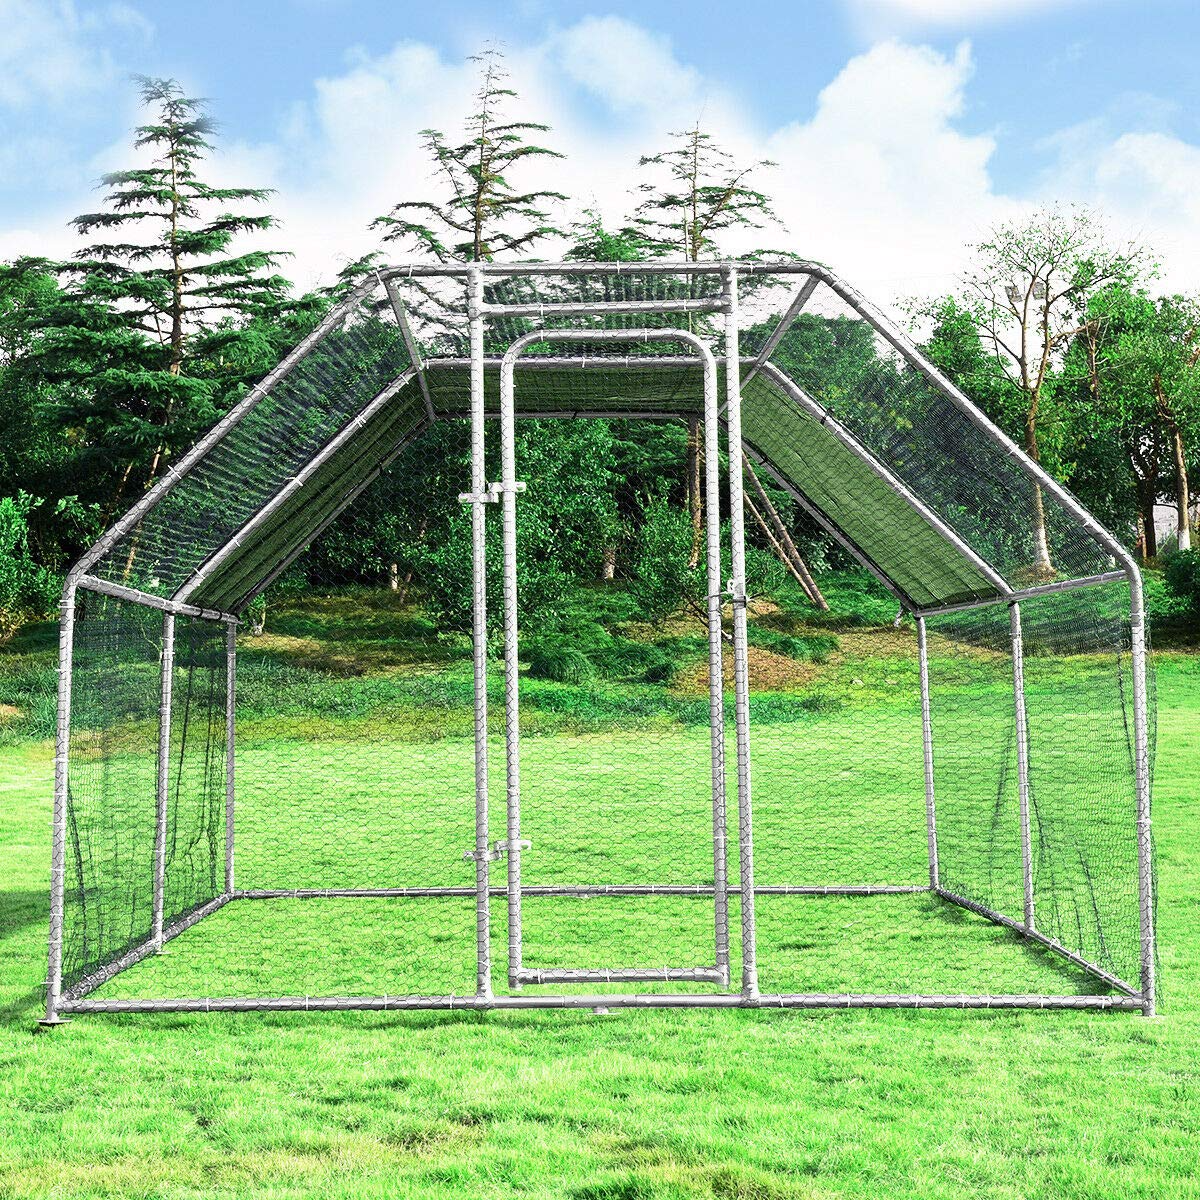 Large Metal Chicken Coop Walk-in Chicken Coops Hen Run House Shade Cage with Waterproof and Anti-Ultraviolet Cover for Outdoor Backyard